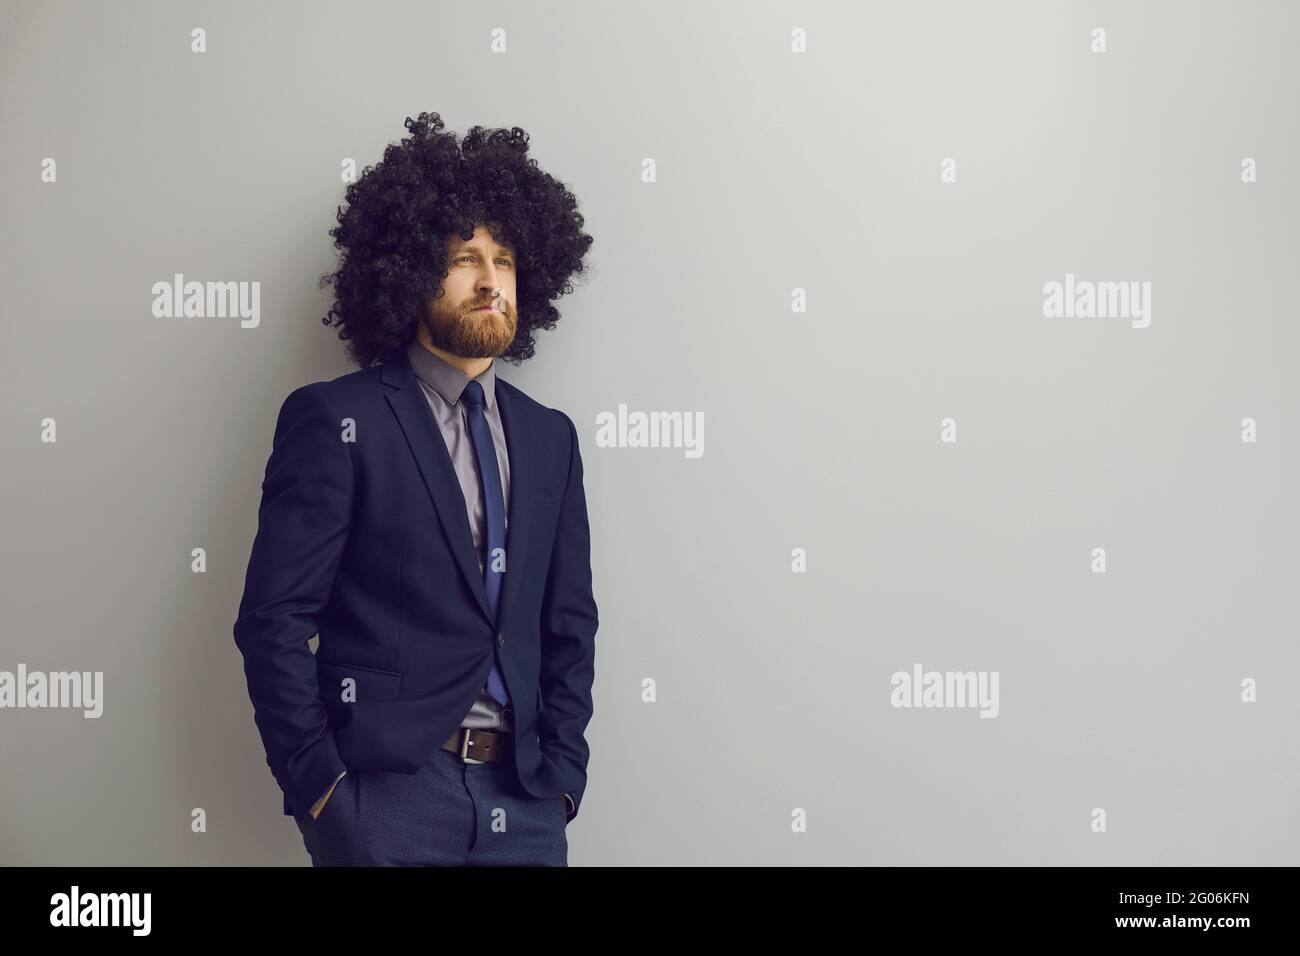 Businessman with funny hair looking away and thinking standing on gray copy space background Stock Photo